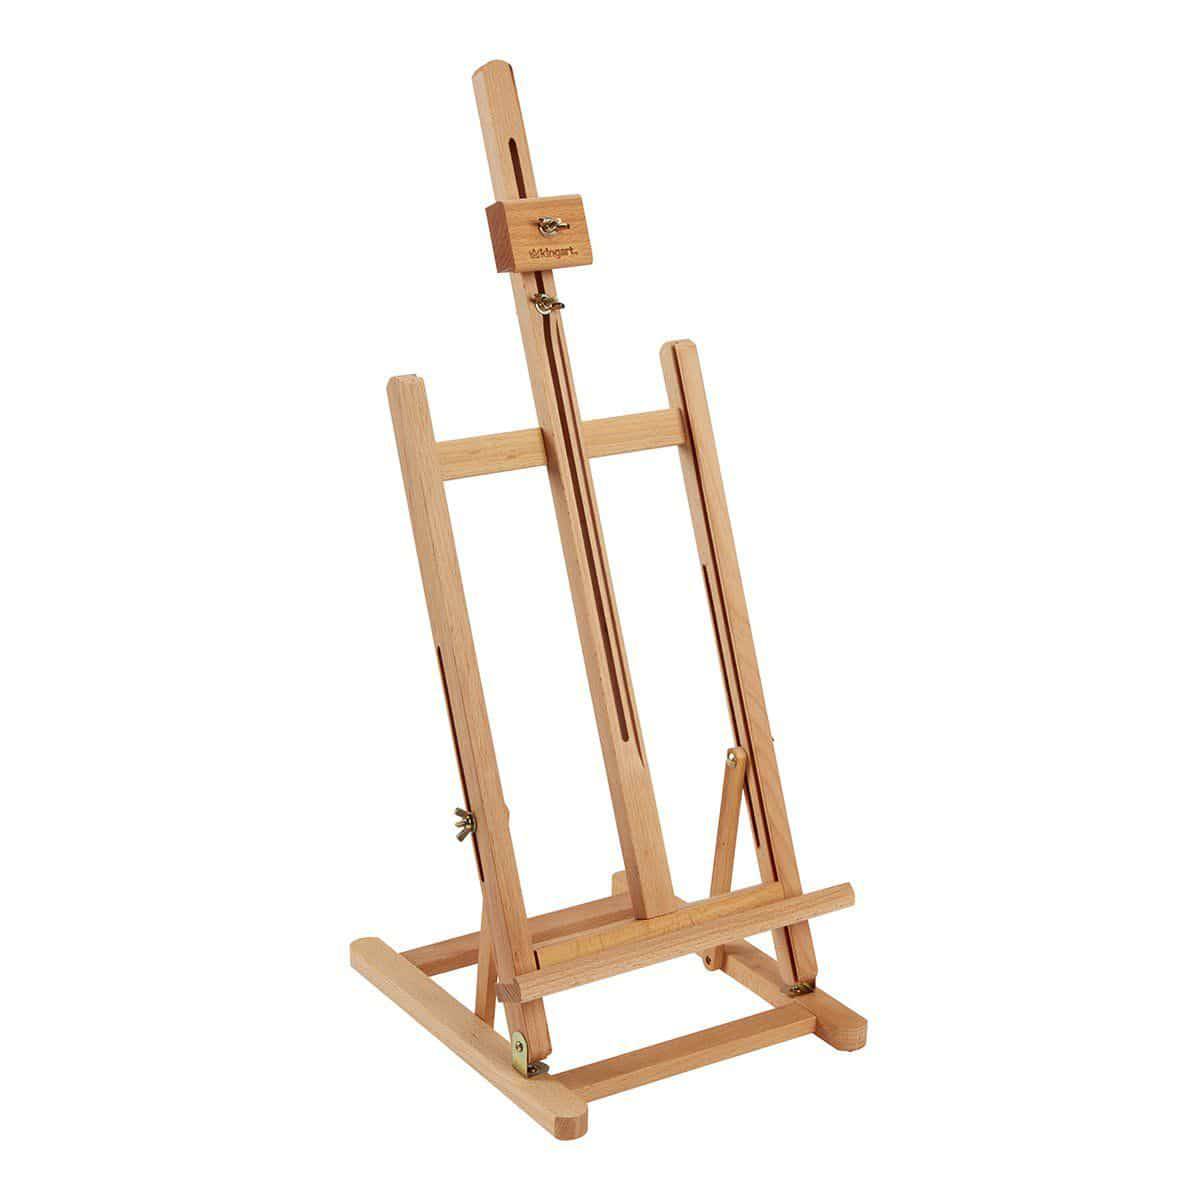 Table Top Easels Painting, Painting Easels Artists